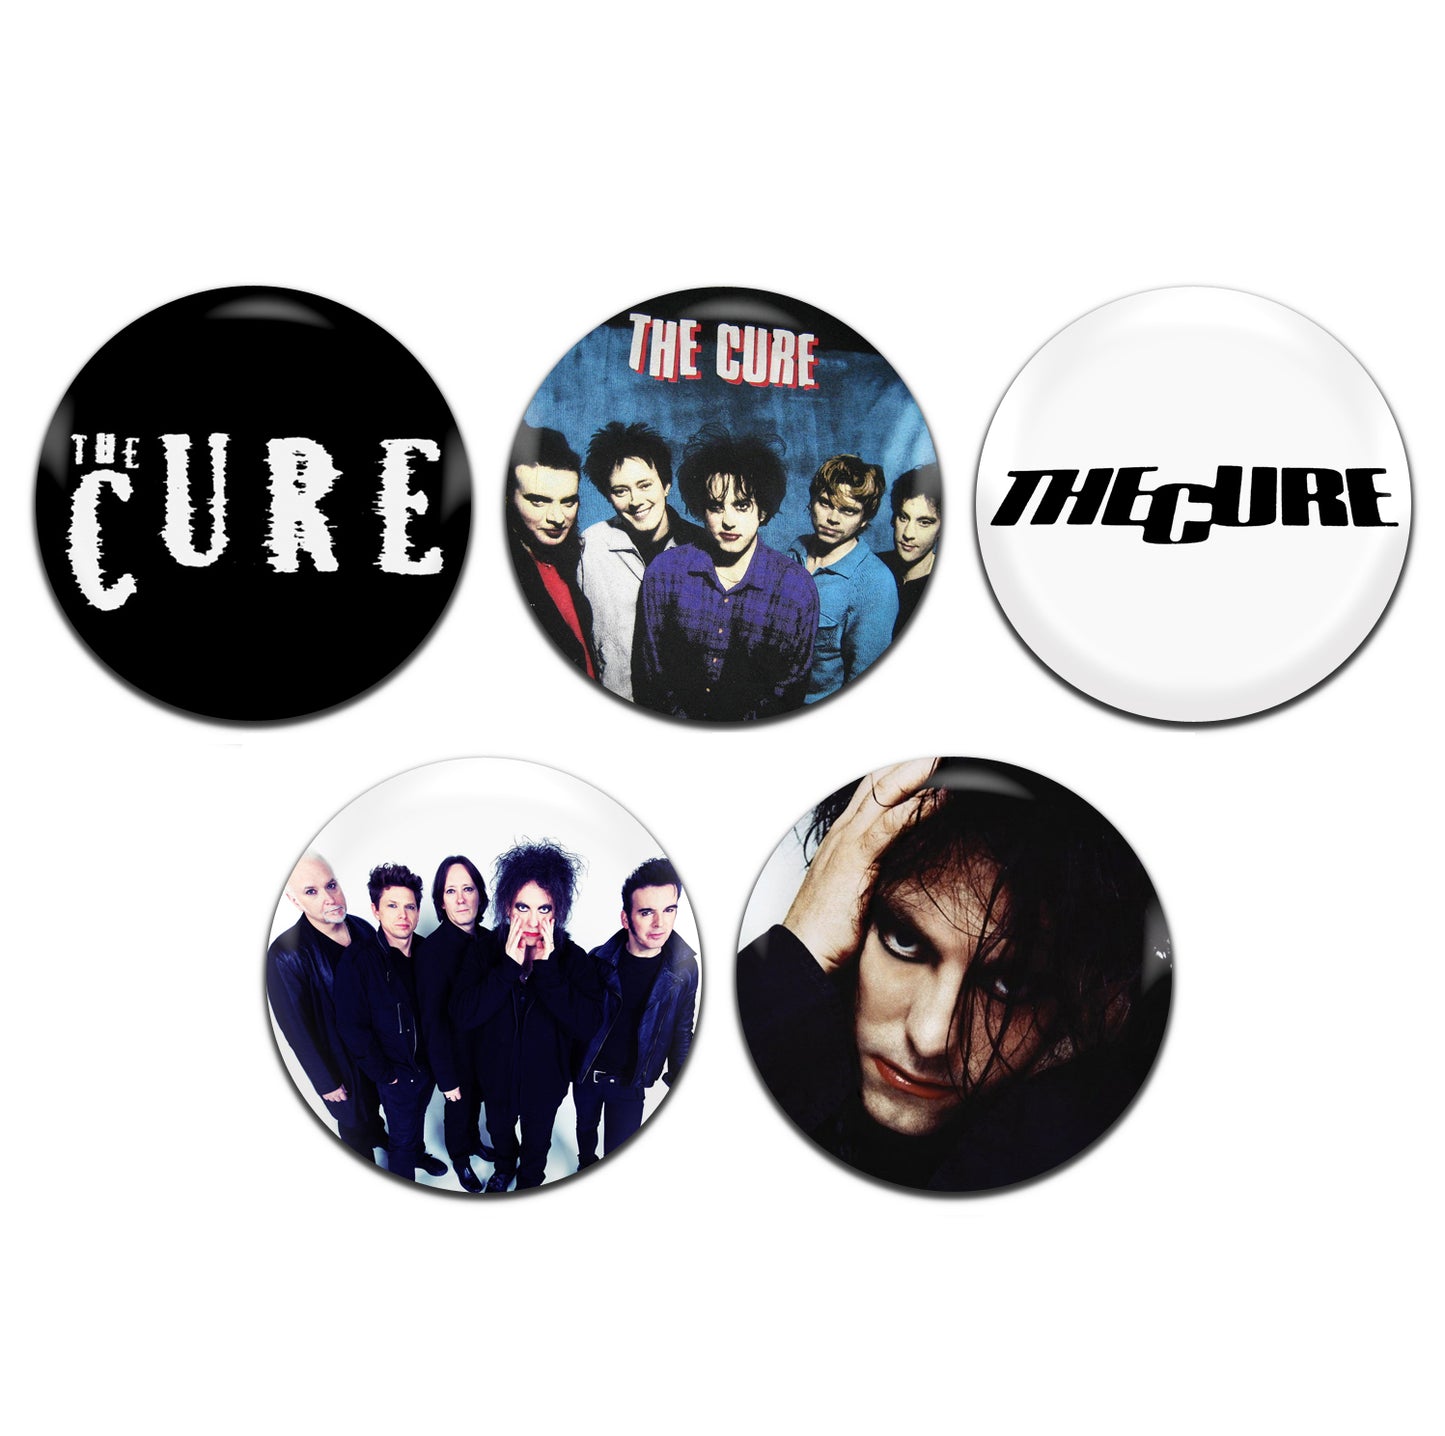 The Cure Alternative Rock Goth Indie New Wave 80's 25mm / 1 Inch D-Pin Button Badges (5x Set)